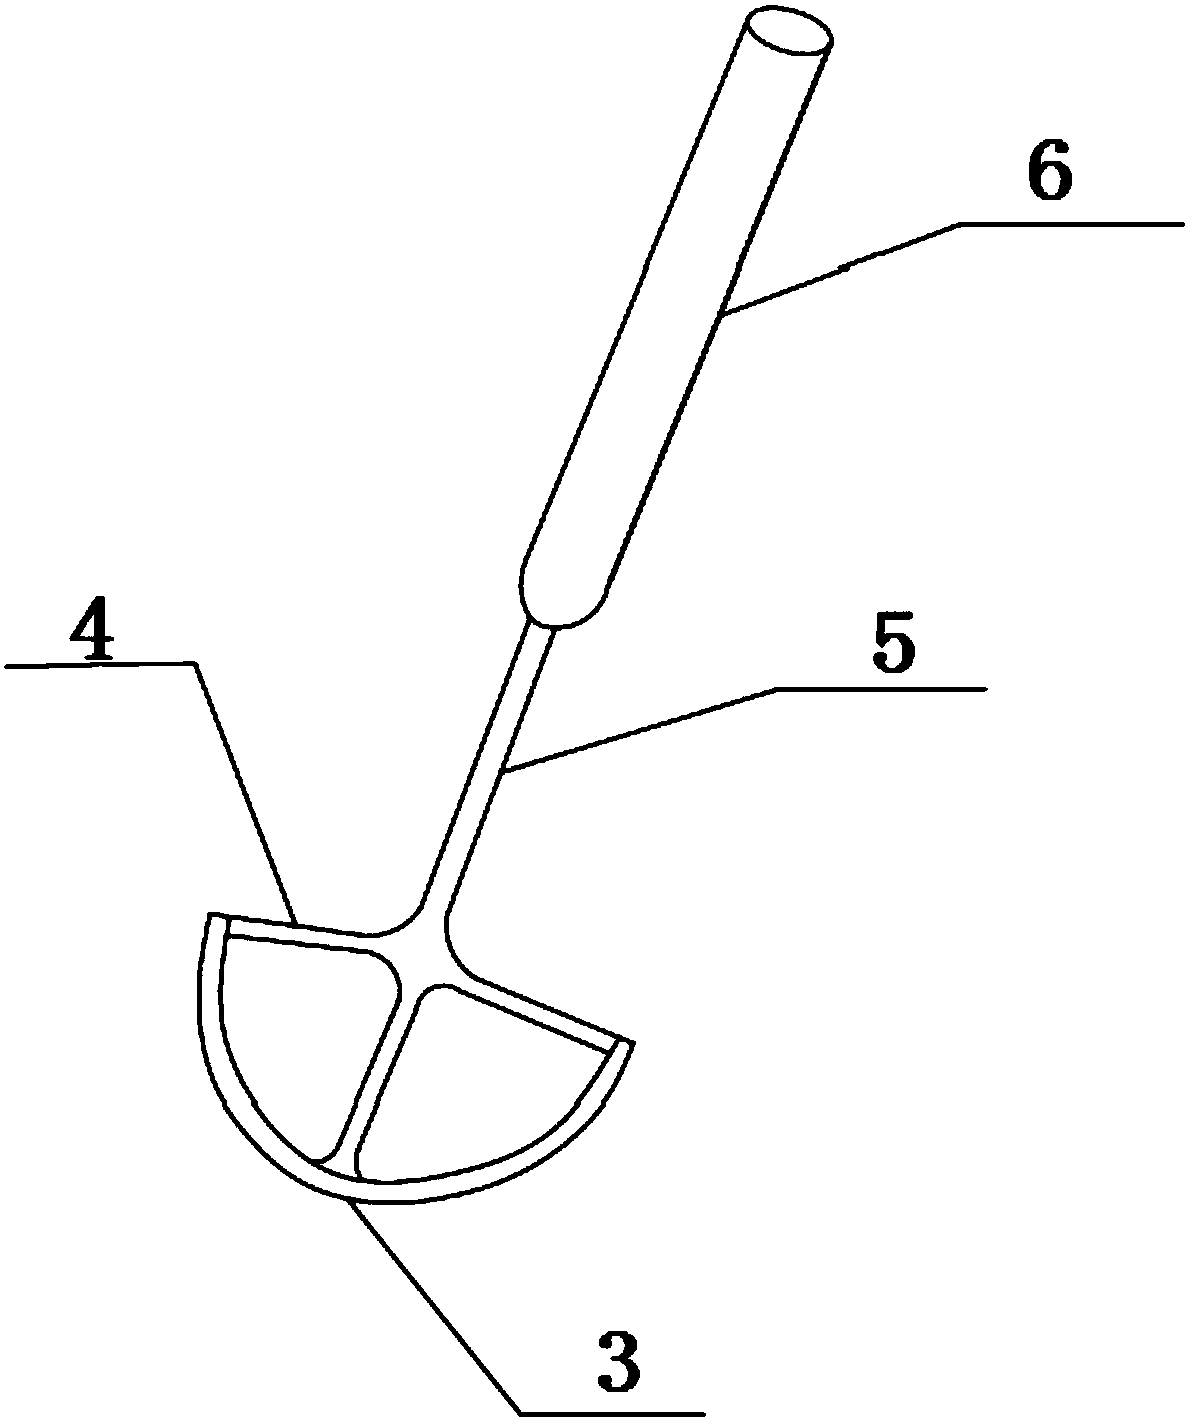 Aortic valve upper forming fixing device